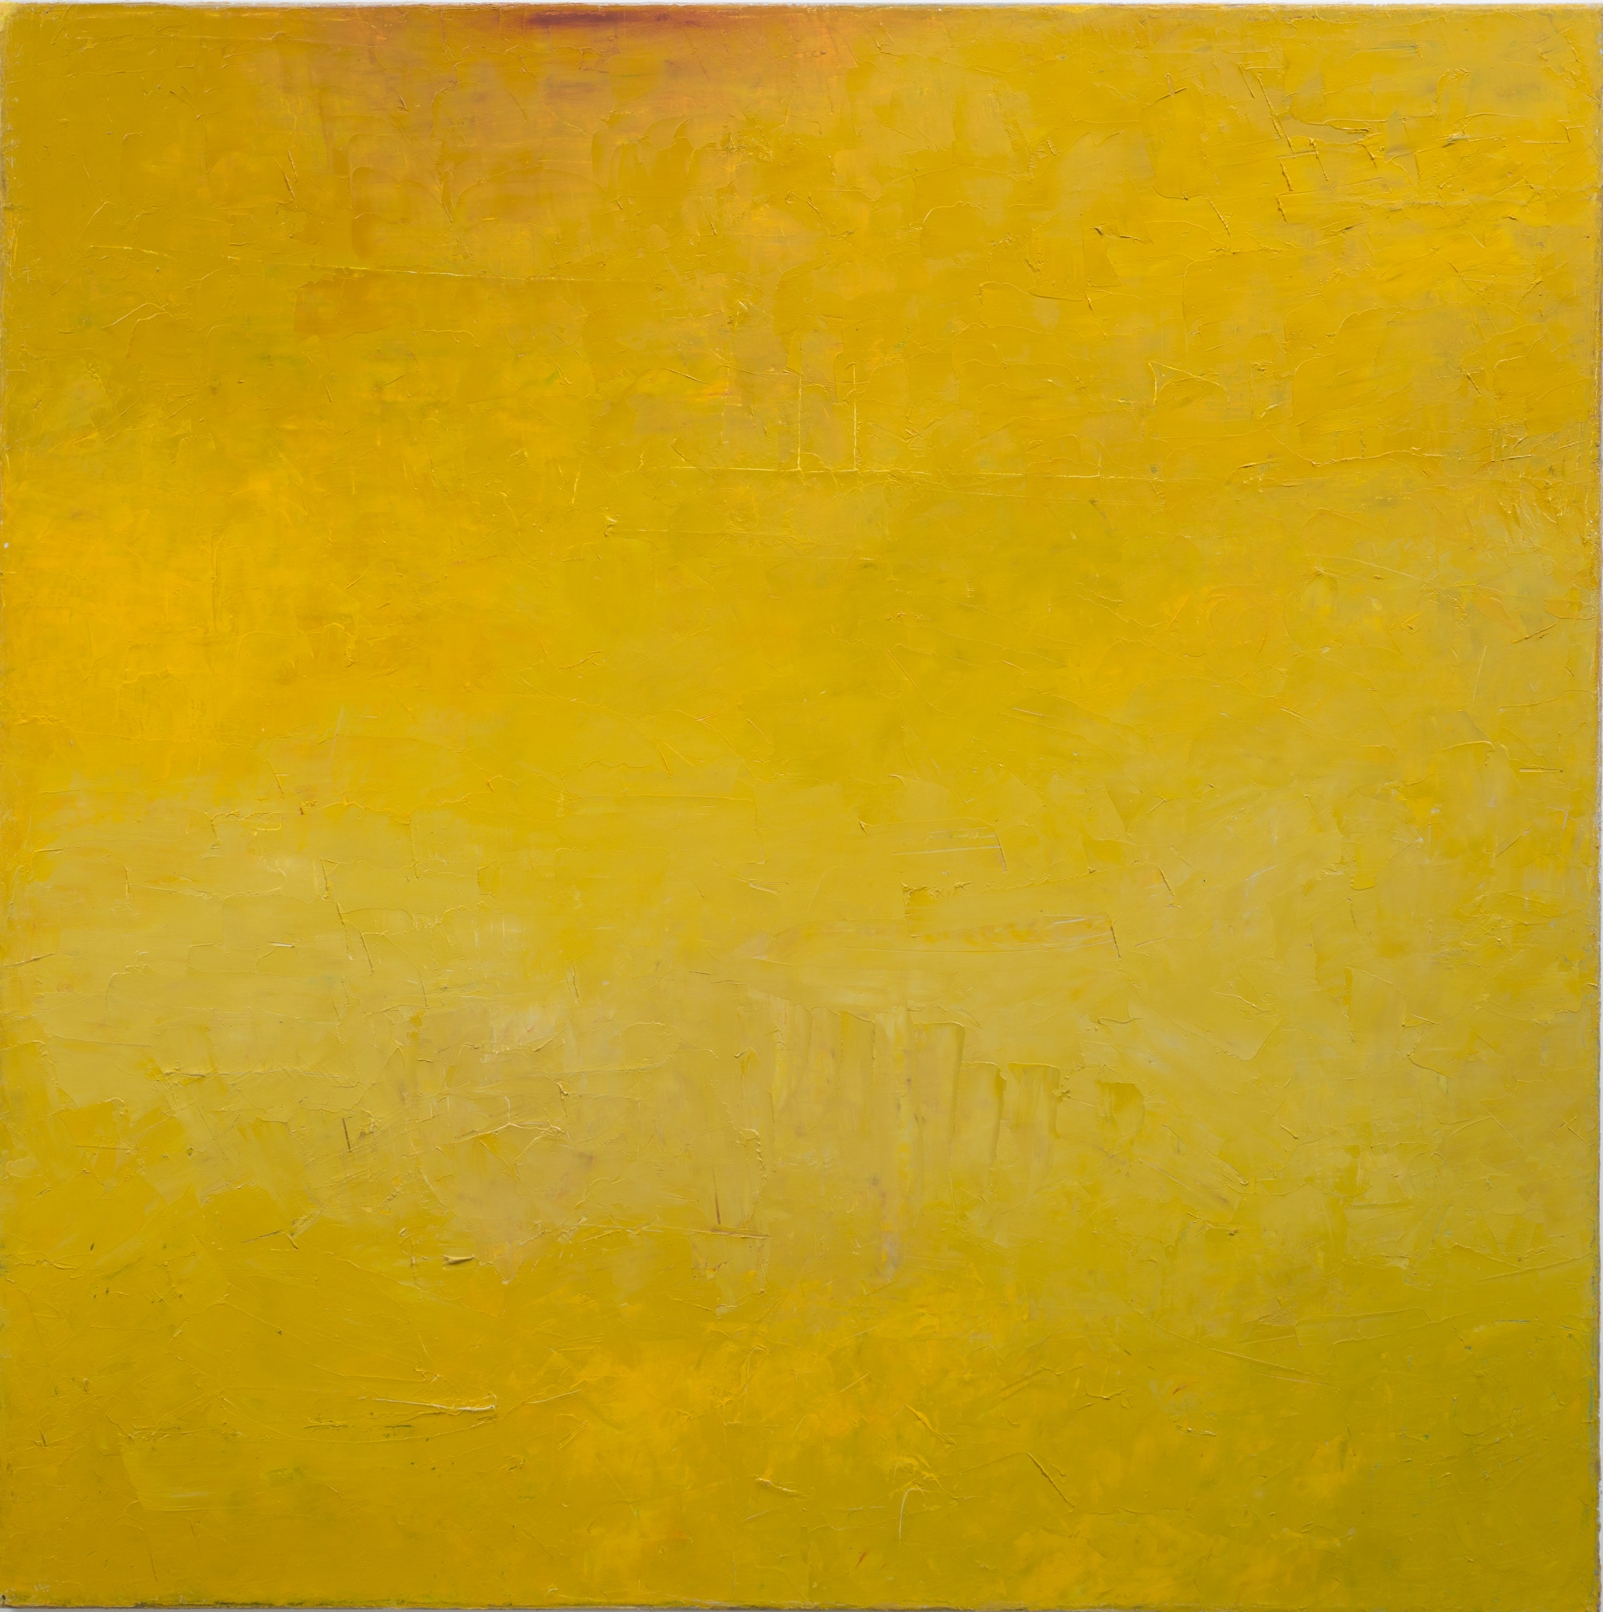 Untitled (yellow/red # 2)